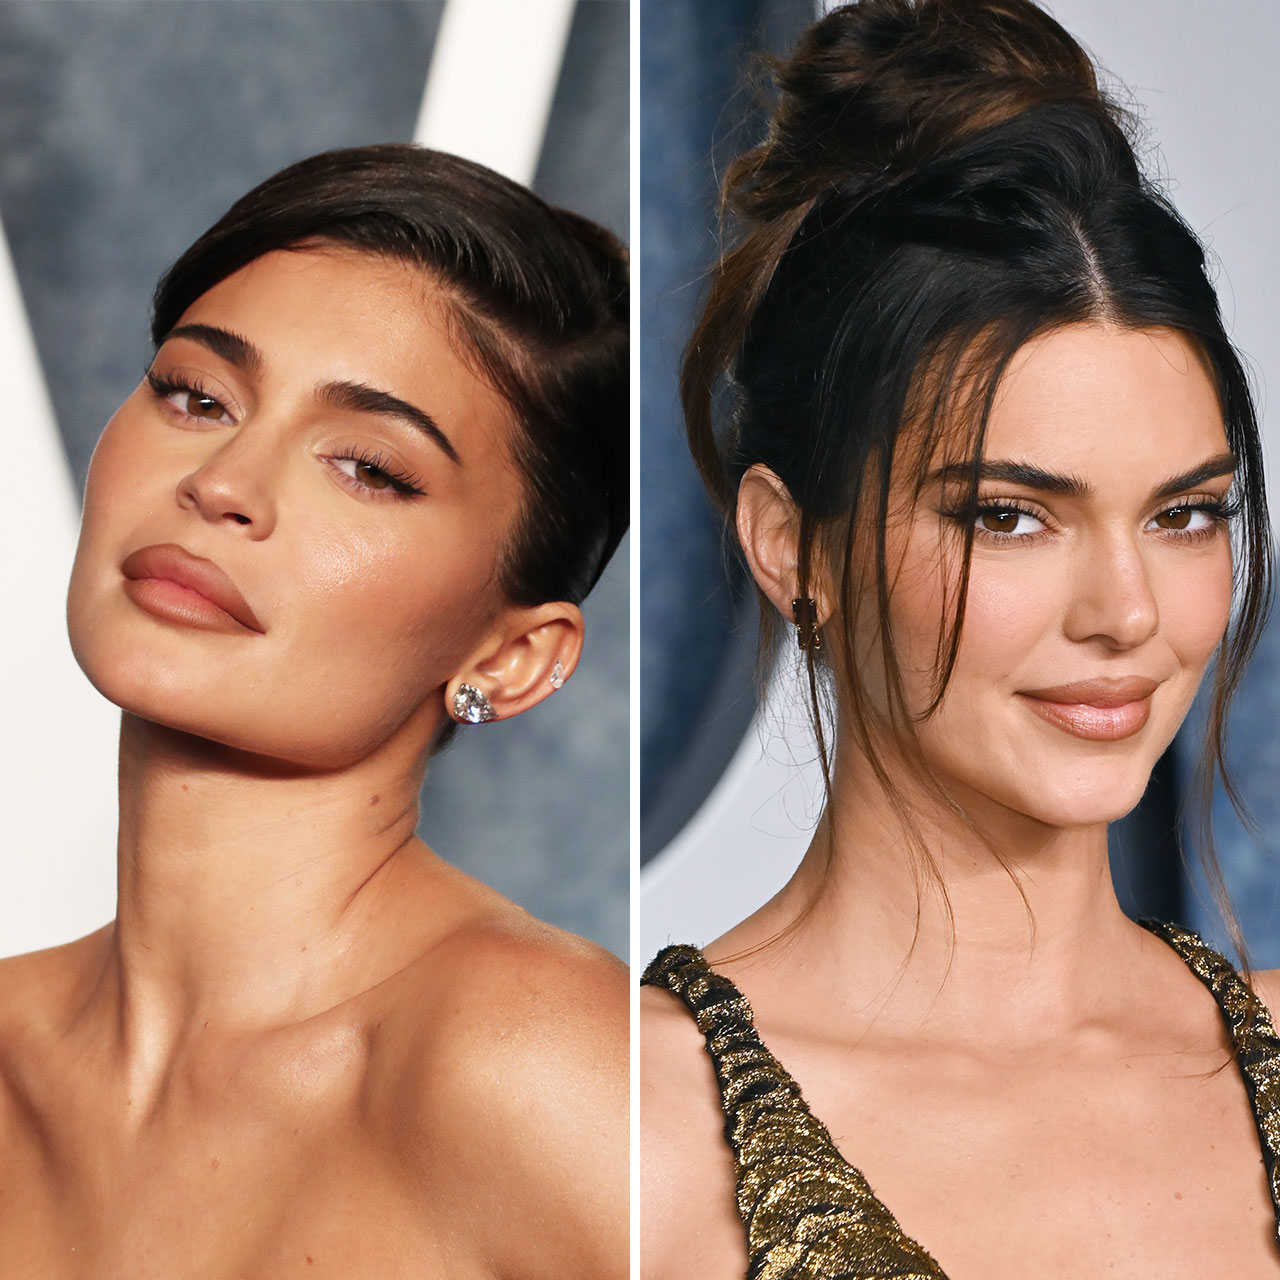 Fans Think Kylie And Kendall Jenner Are Looking More Alike After